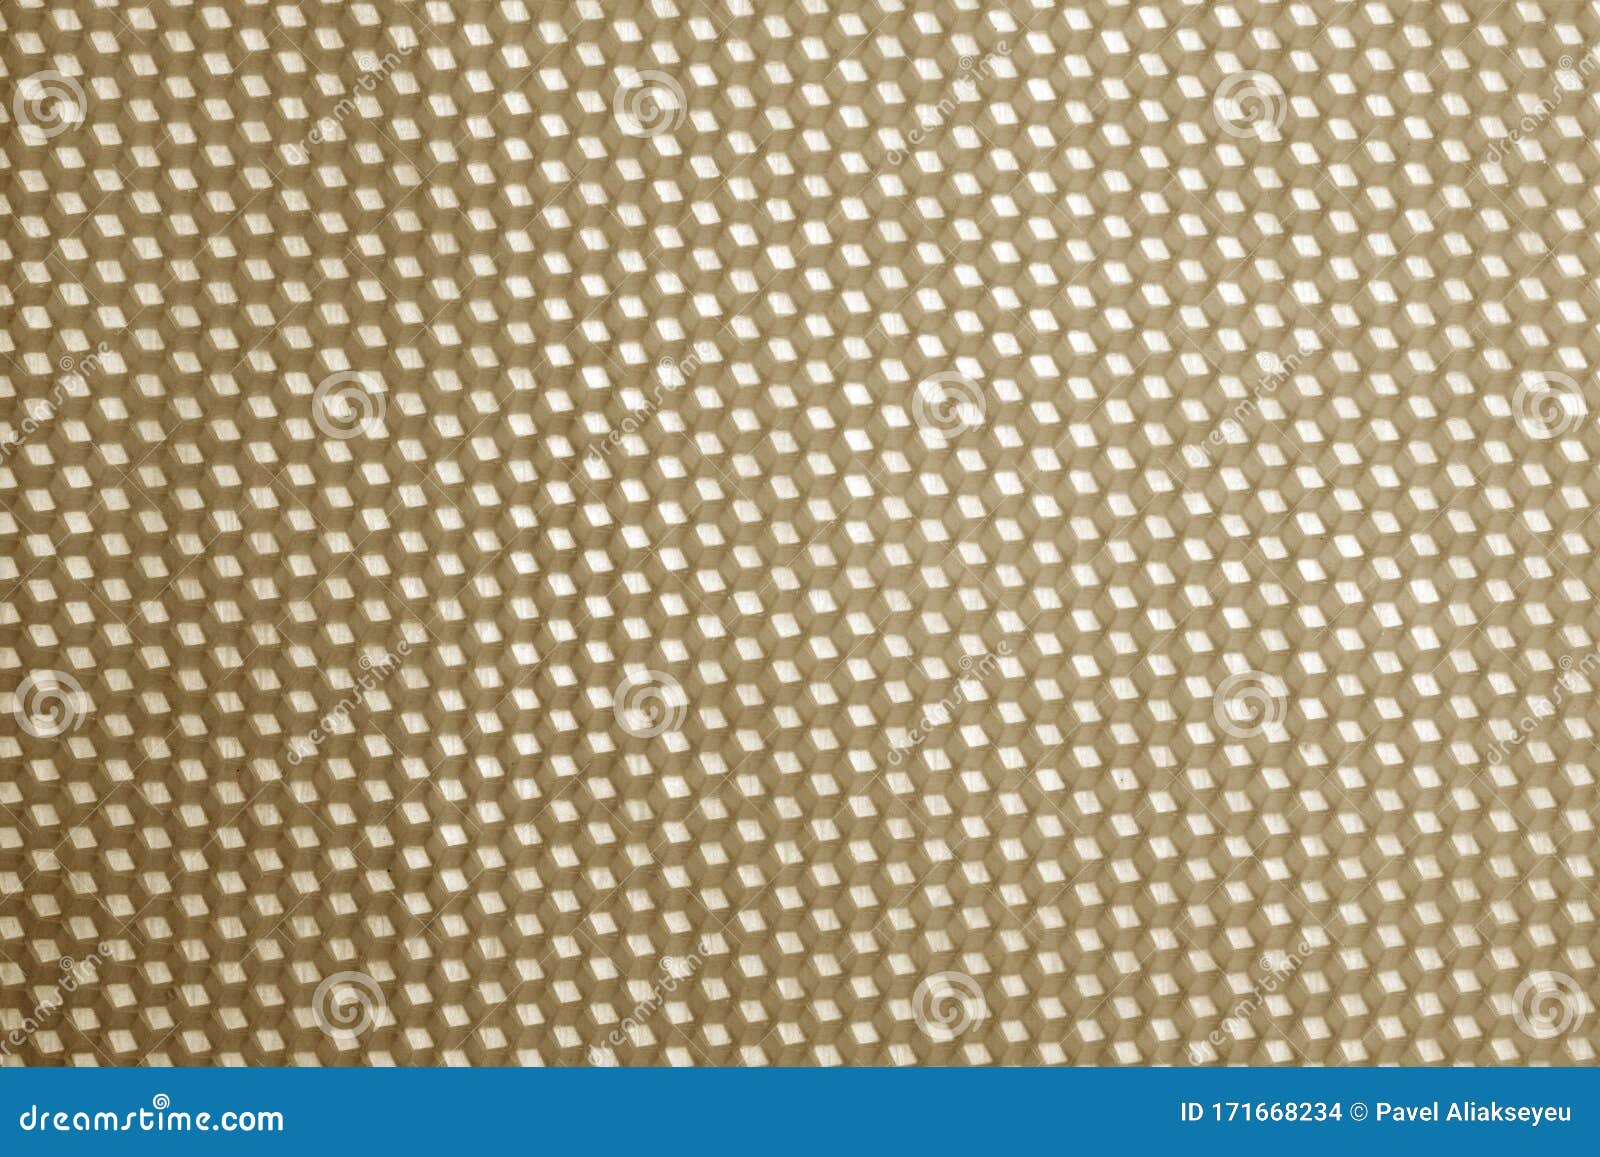 Honeycomb Cells Pattern in Brown Tone Stock Photo - Image of beehive ...